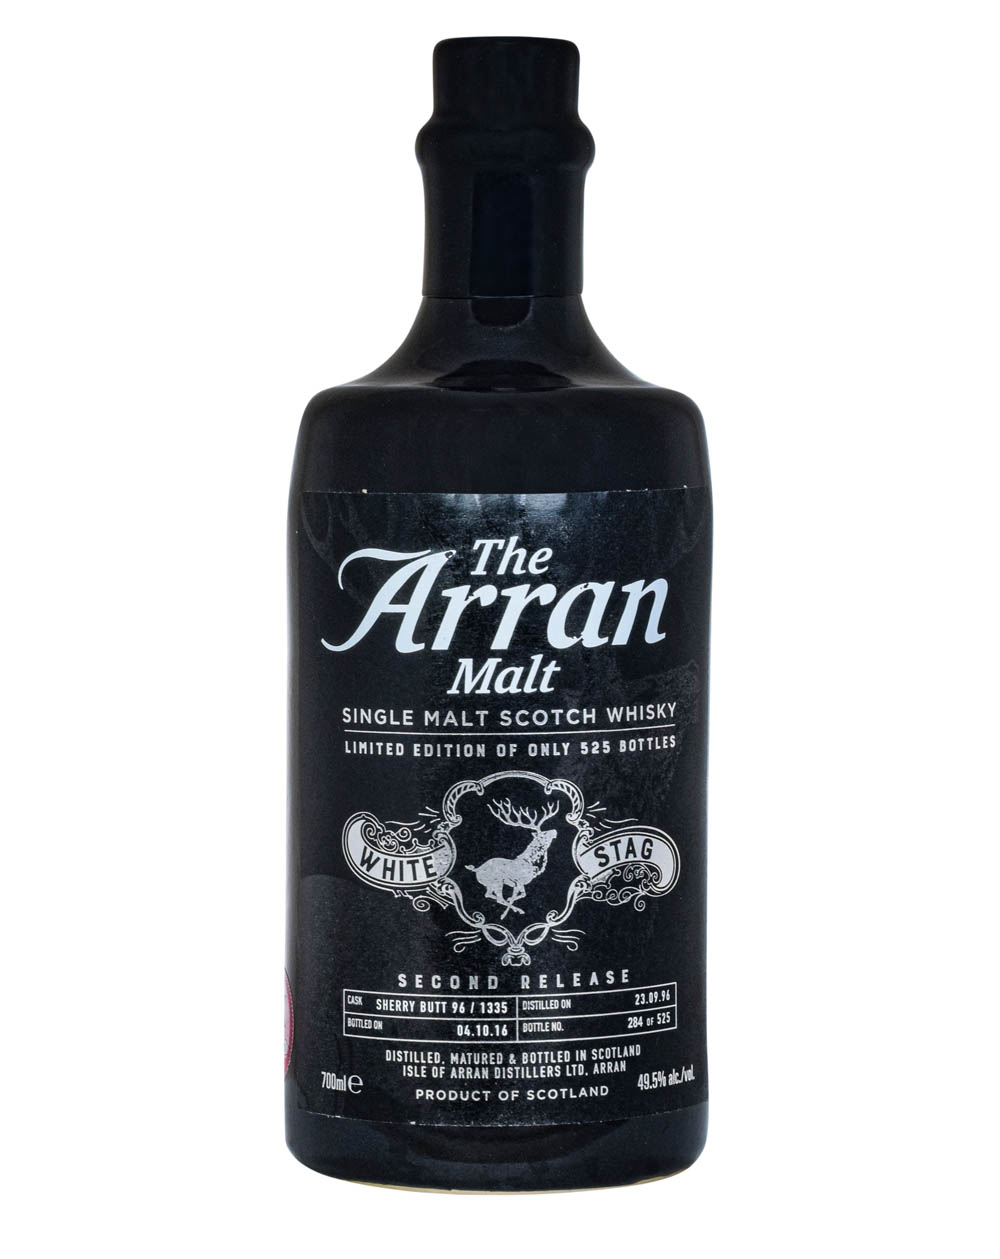 Arran White Stag Second Release Musthave Malts MHM